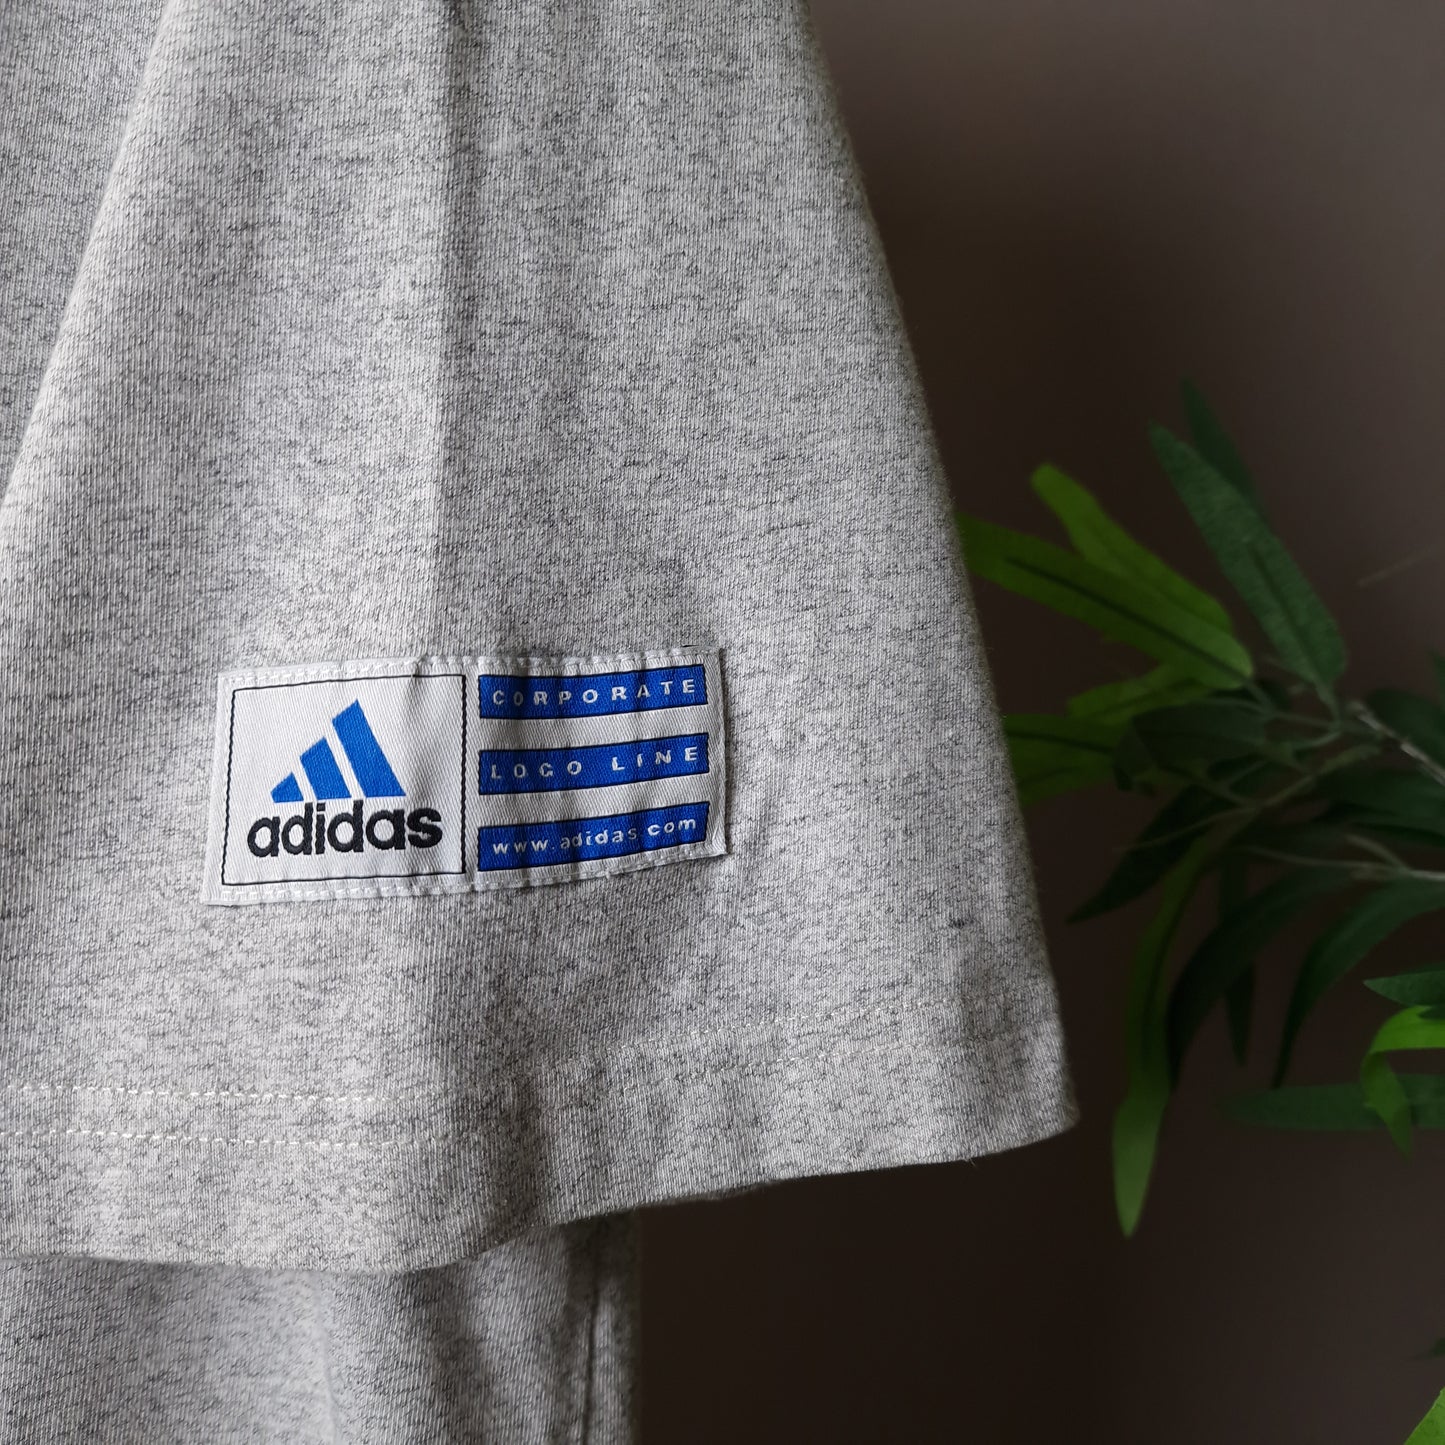 Vintage Adidas t-shirt in grey and blue - large